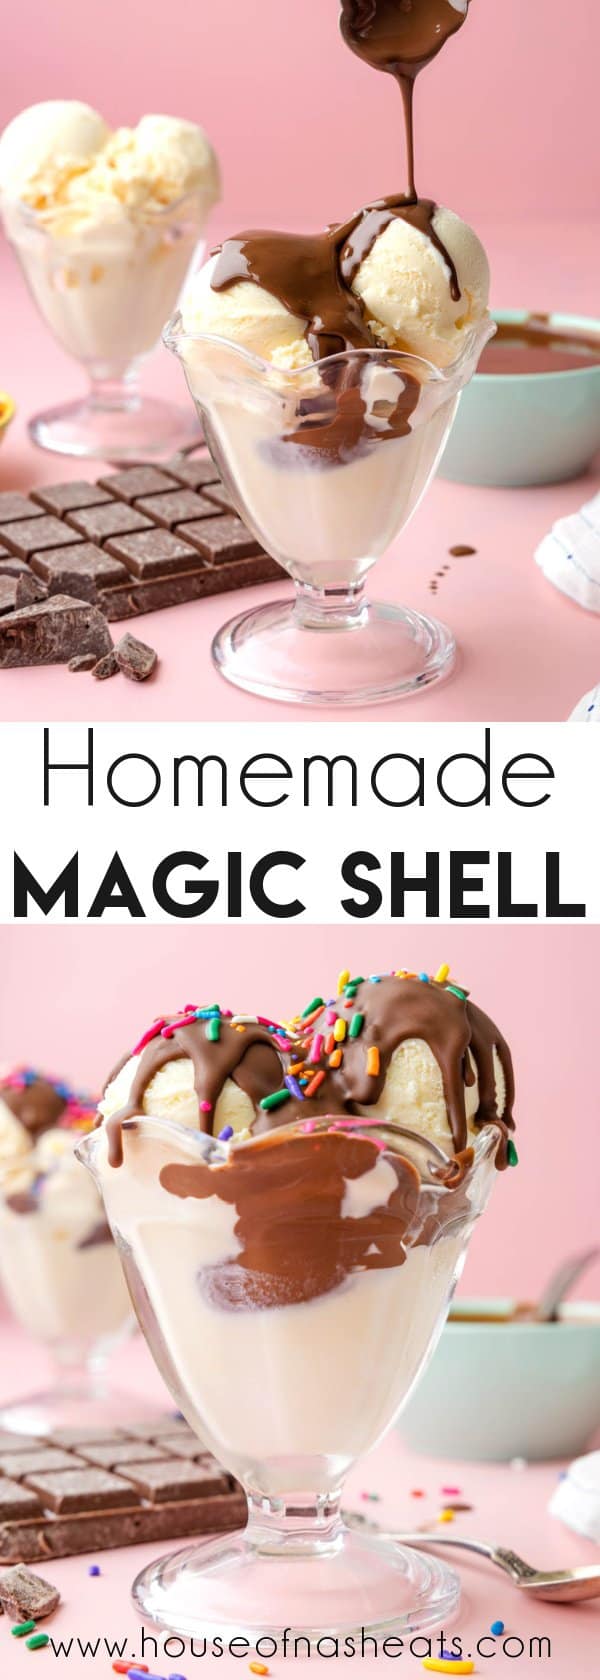 A collage of images of homemade chocolate magic shell with text overlay.